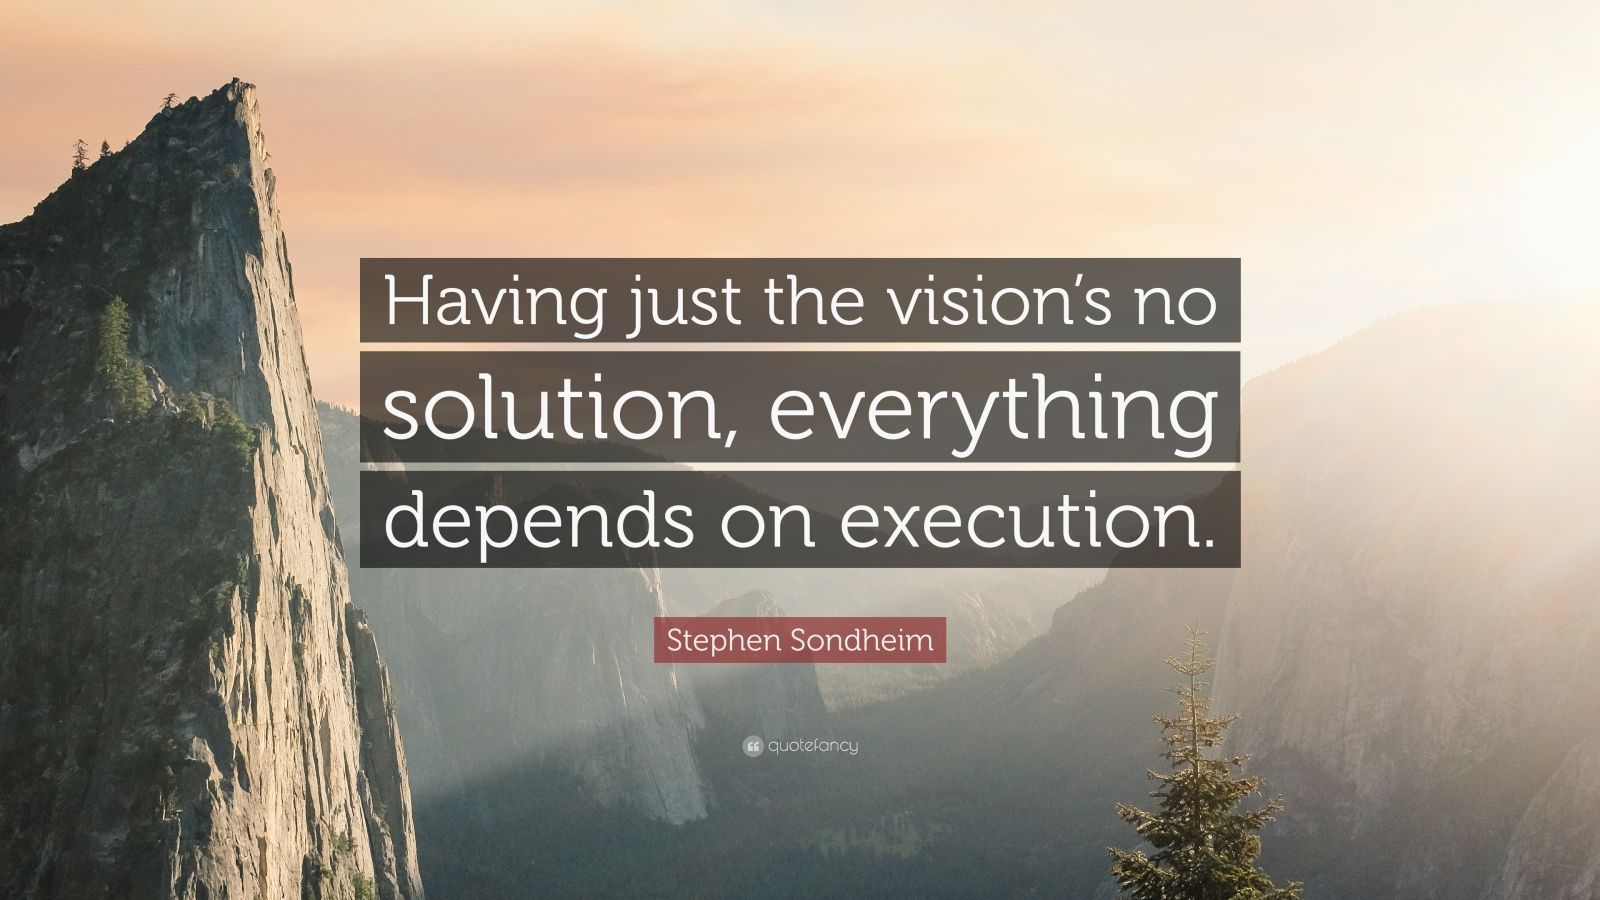 Top 40 Vision Quotes | 2021 Edition | Free Images - QuoteFancy